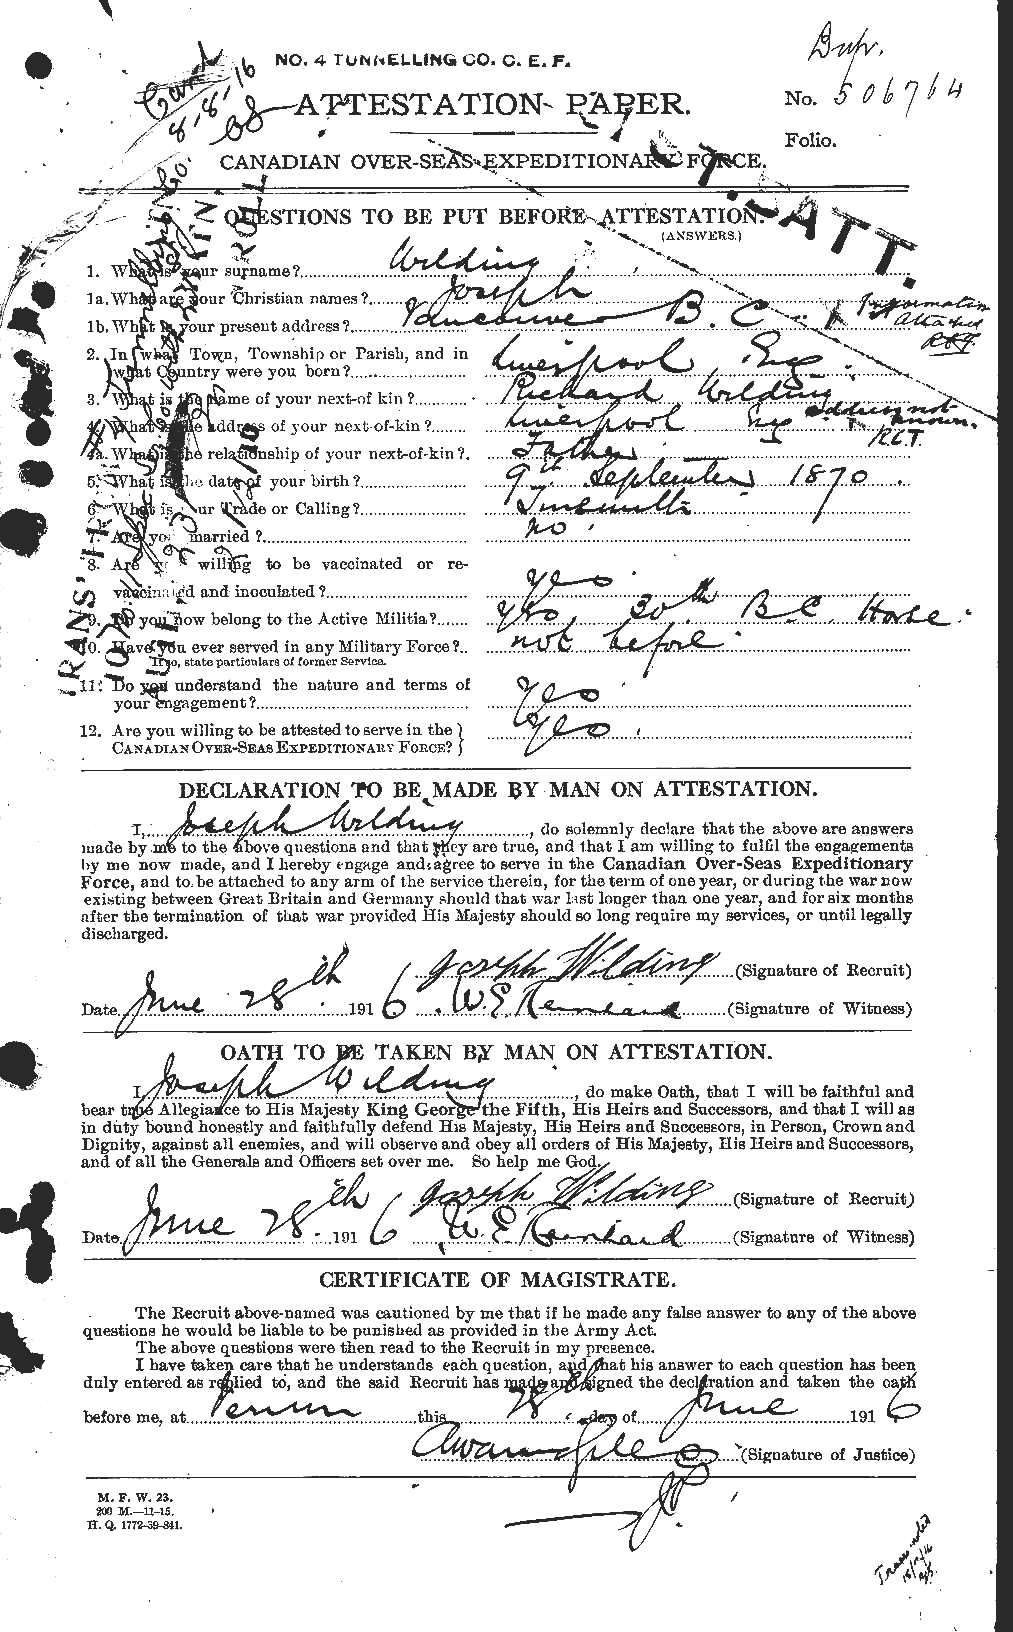 Personnel Records of the First World War - CEF 680104a